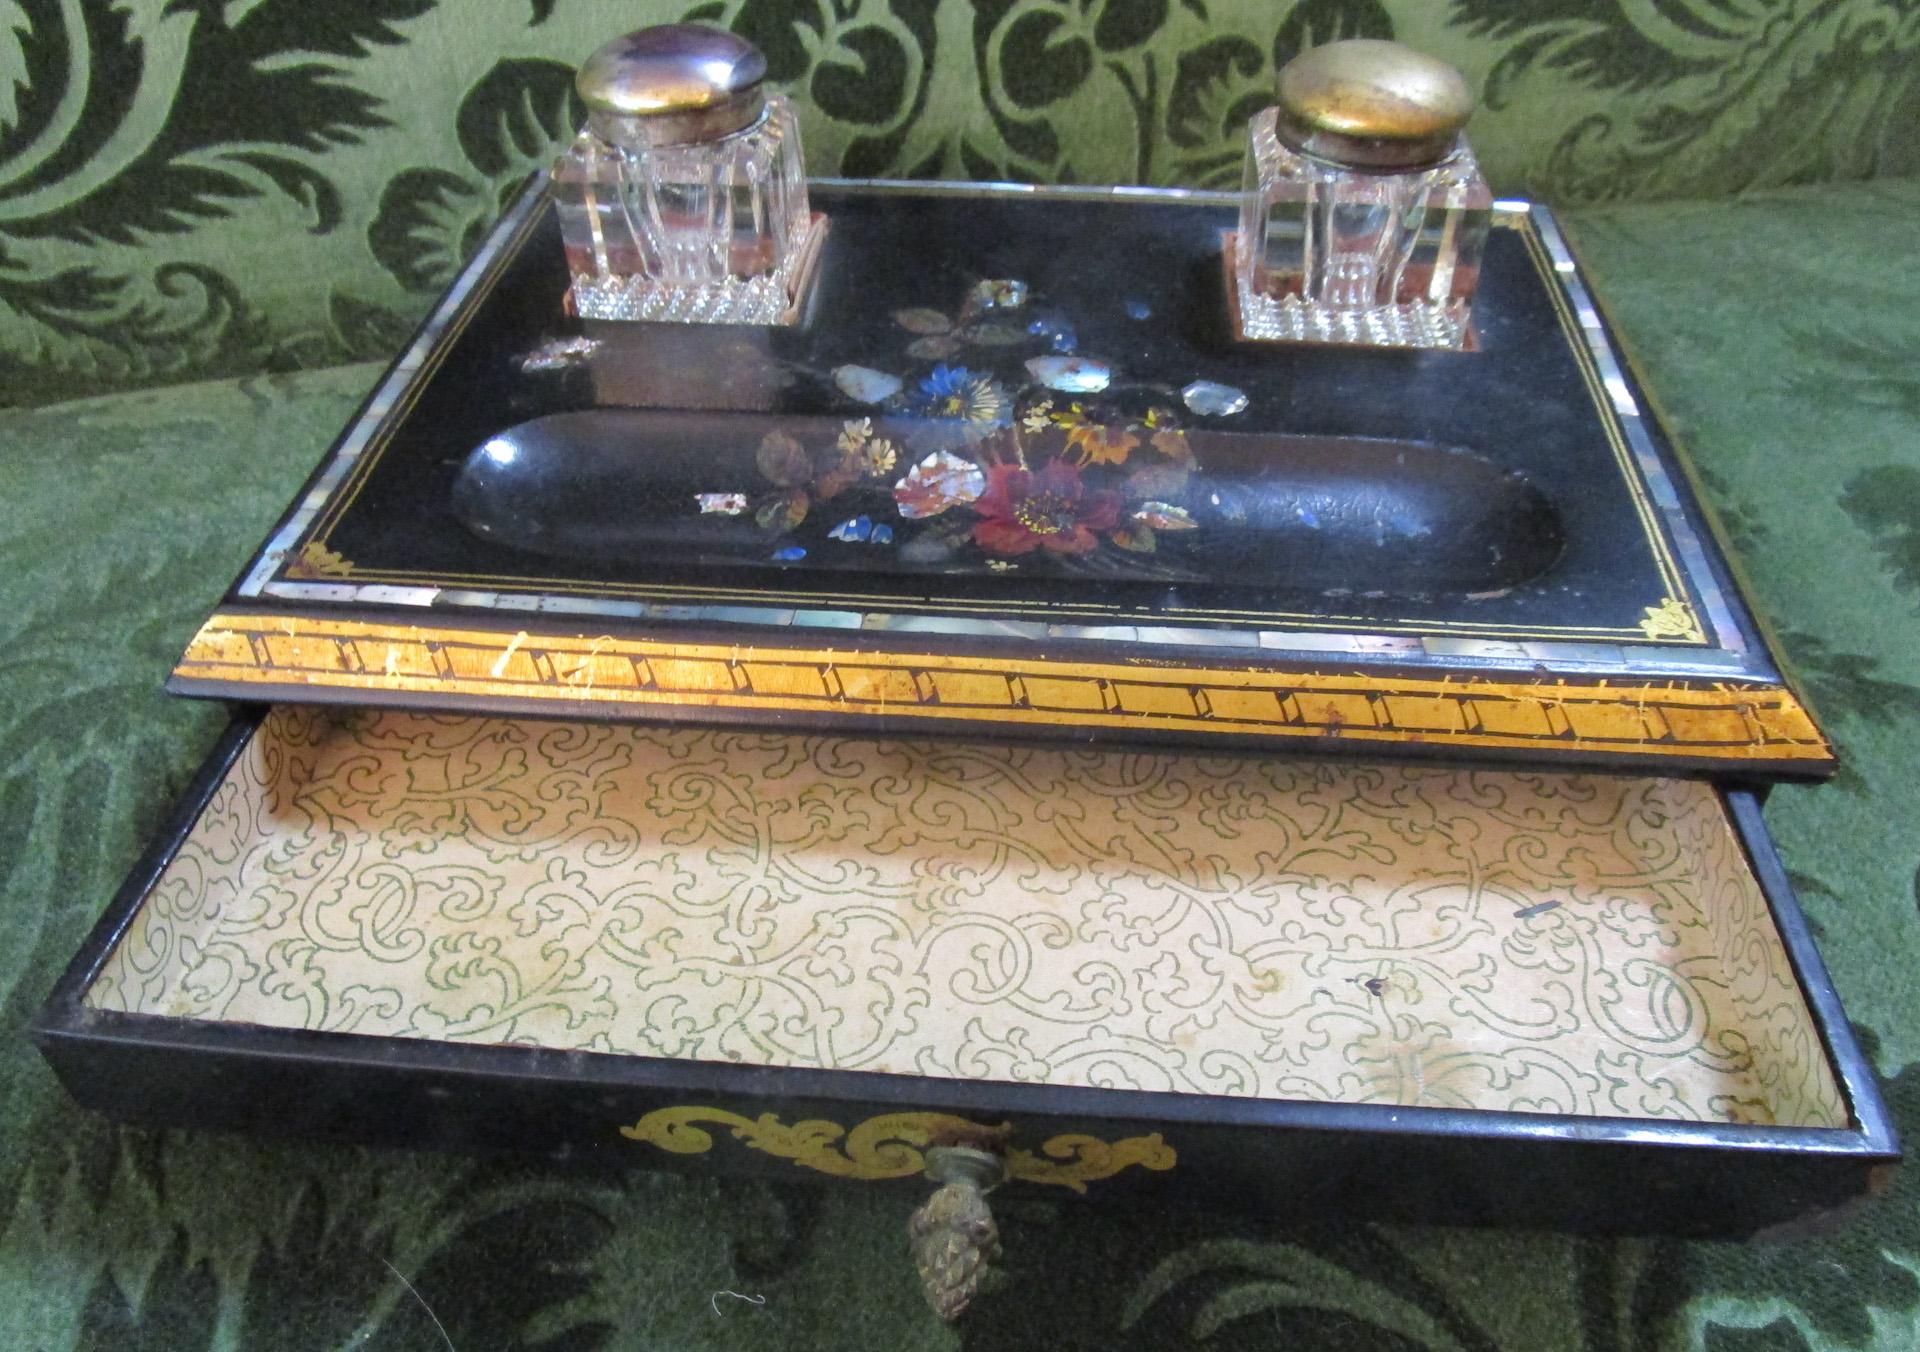 This high quality Papier-Mache desk set is beautifully hand painted in a floral motif and features inlaid mother of pearl and the original pair of cut glass inkwells with brass tops. The very special feature that I have never seen before in an